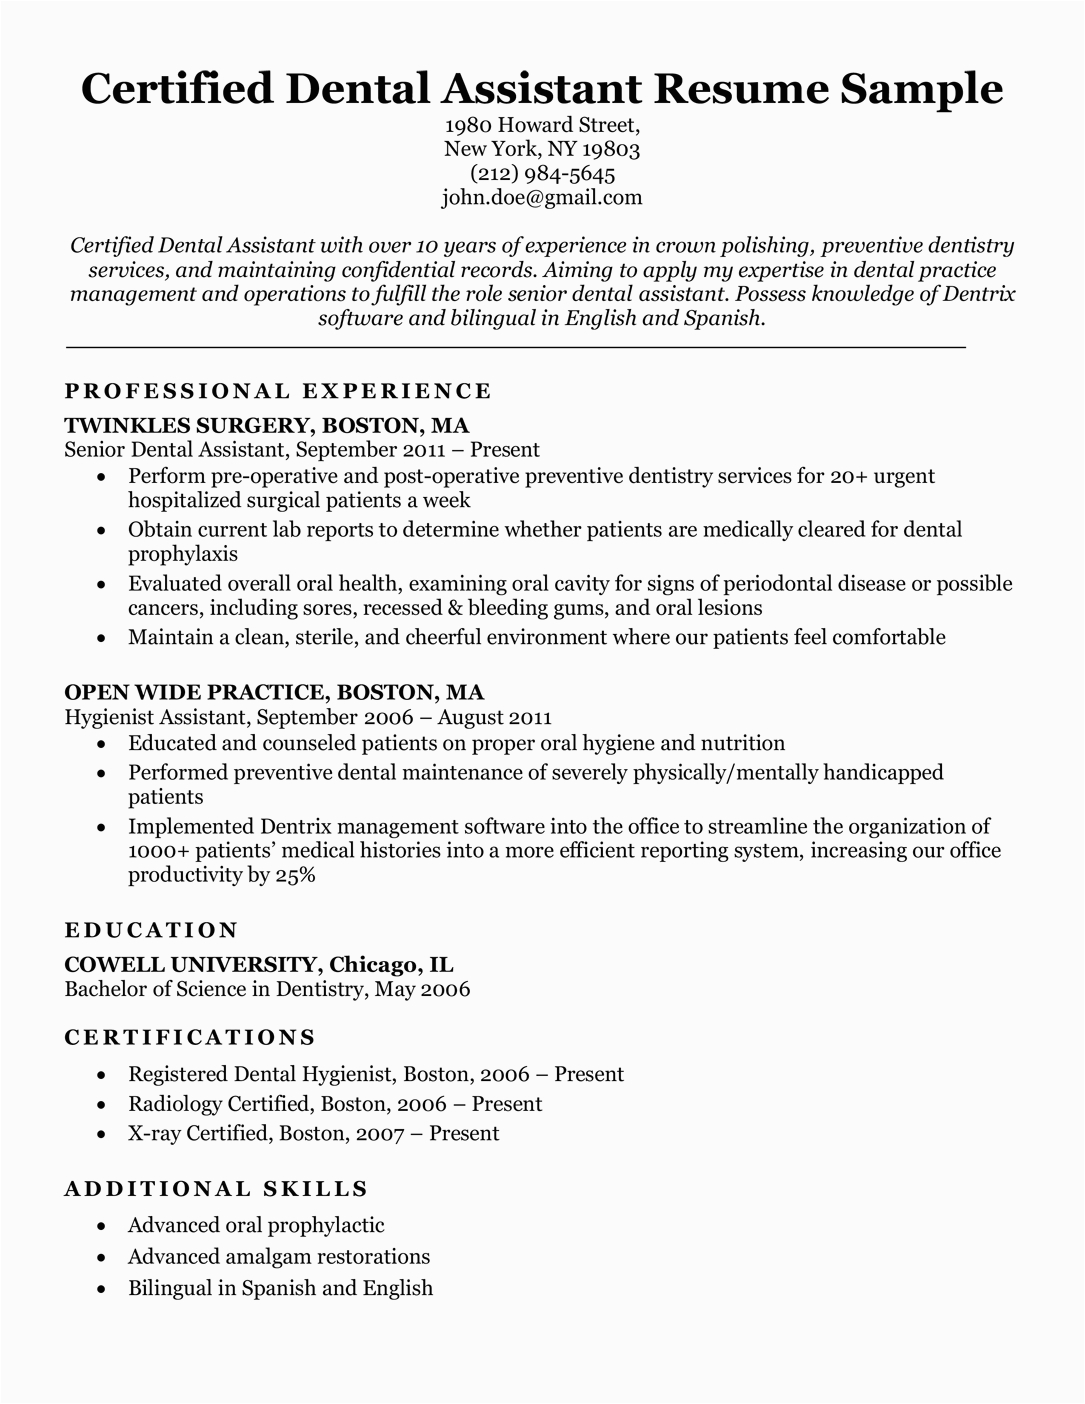 Sample Resume for Dental assistant with No Experience Dental Resume Examples & Writing Tips